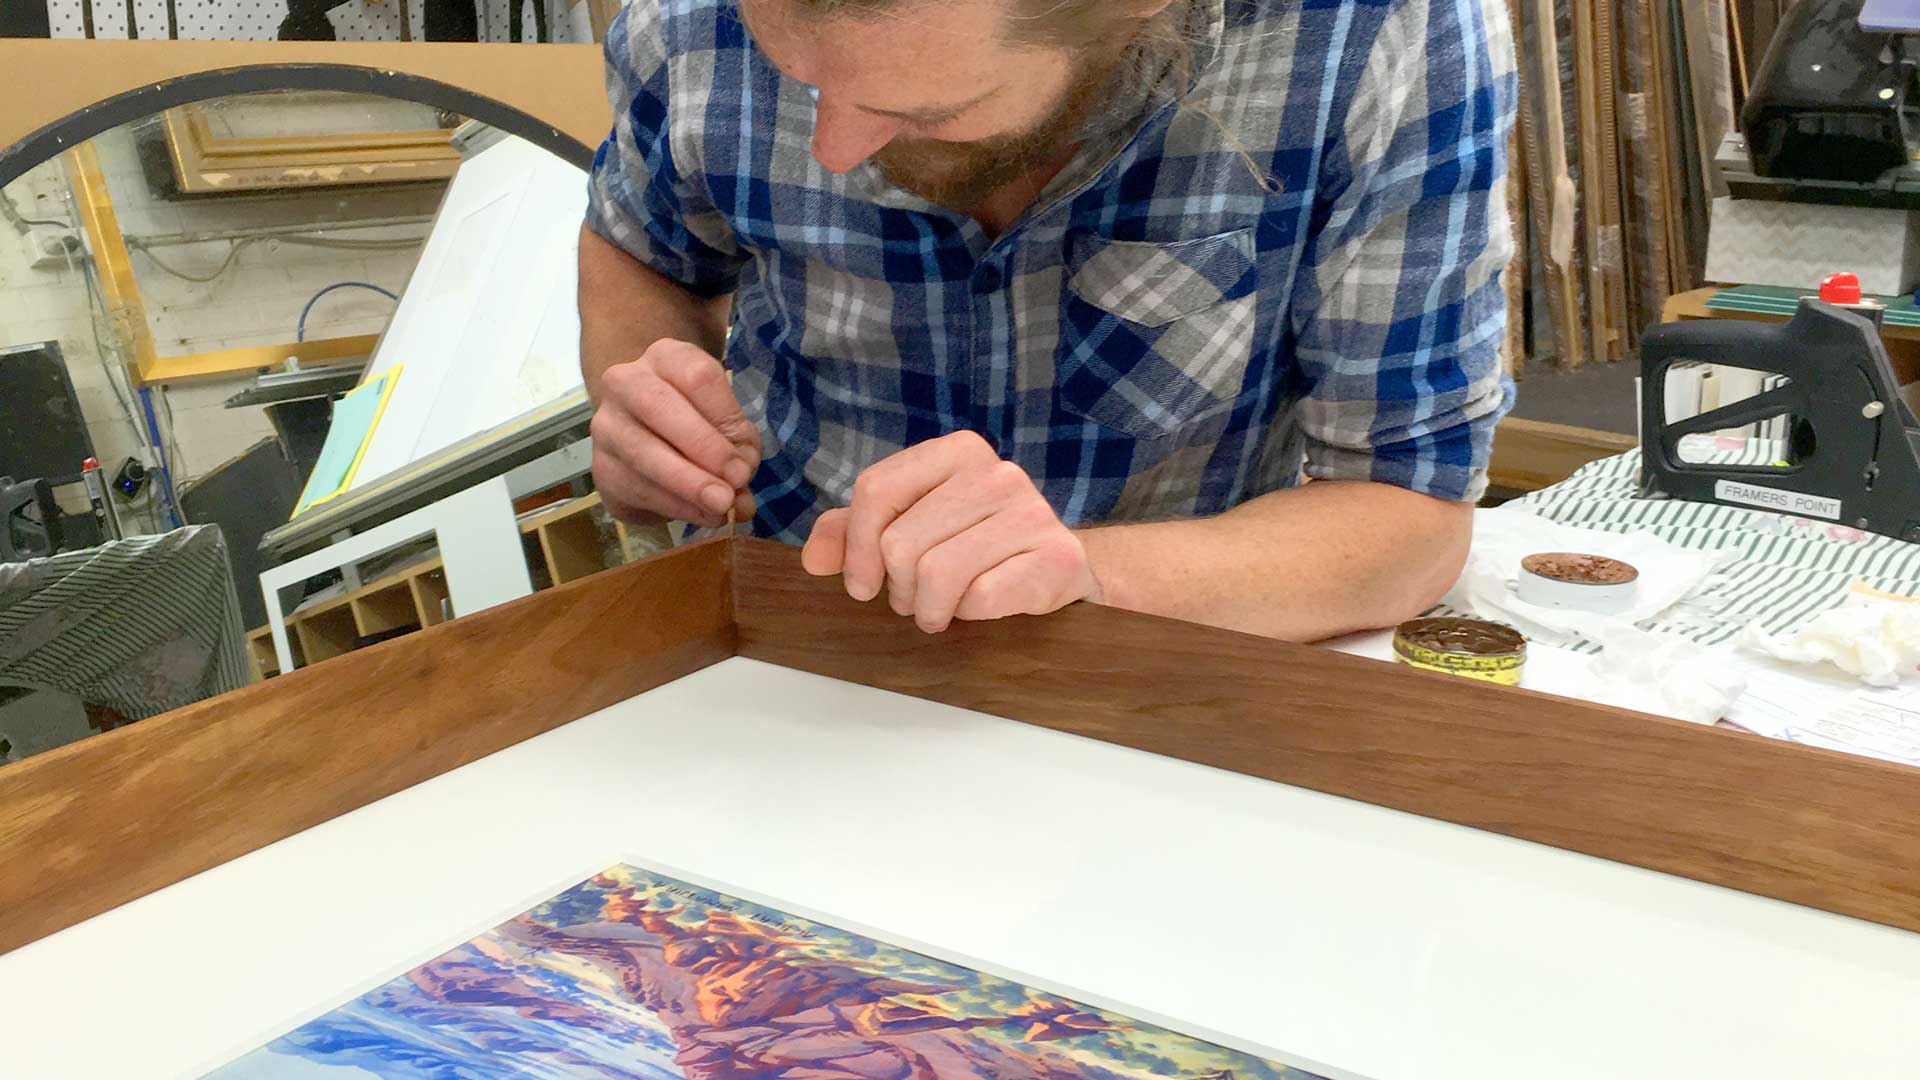 one of our workshop team members applying finishing touches to a hand-stained and waxed blackwood frame with artwork by Albert Namatjira